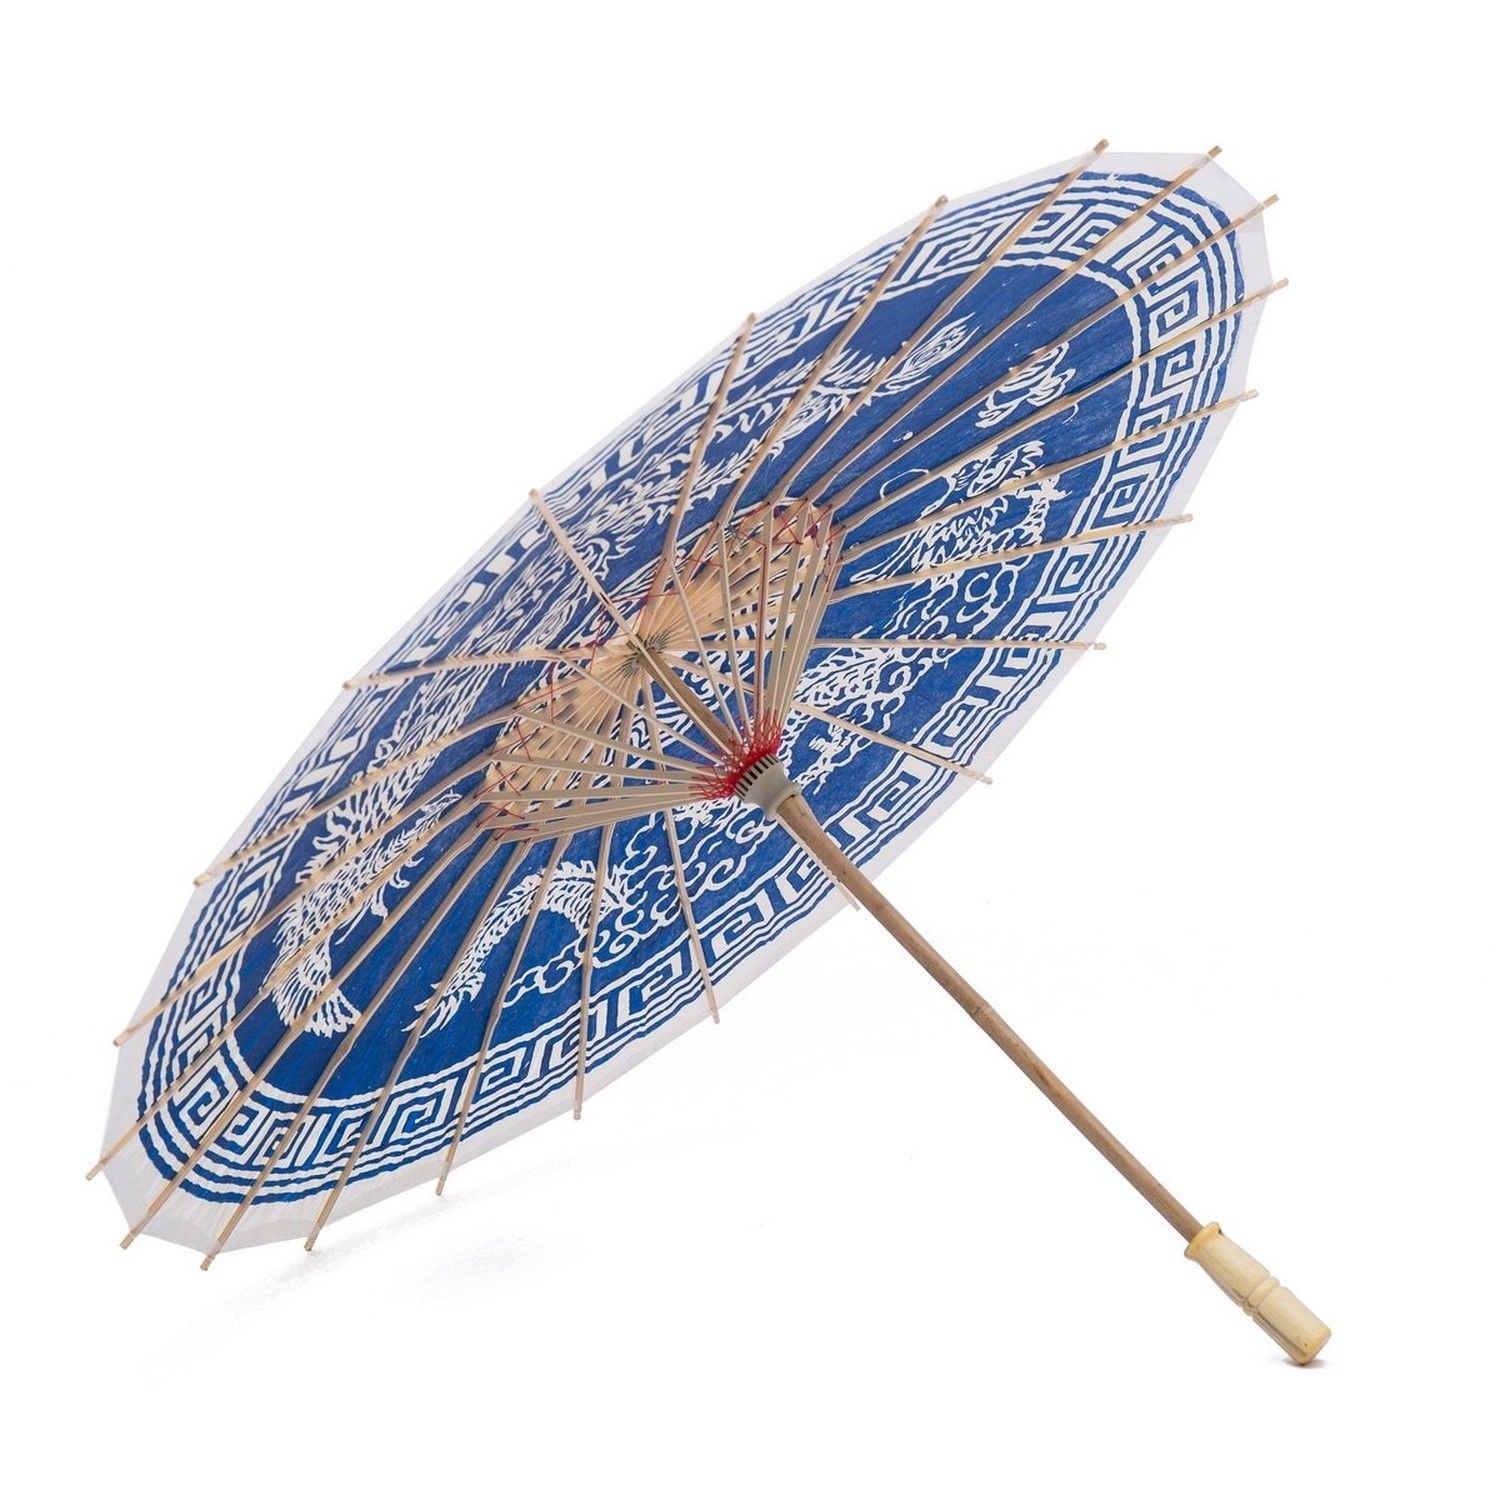 THY COLLECTIBLES Rainproof Handmade Chinese Oiled Paper Umbrella Parasol 33" ... - image 2 of 3